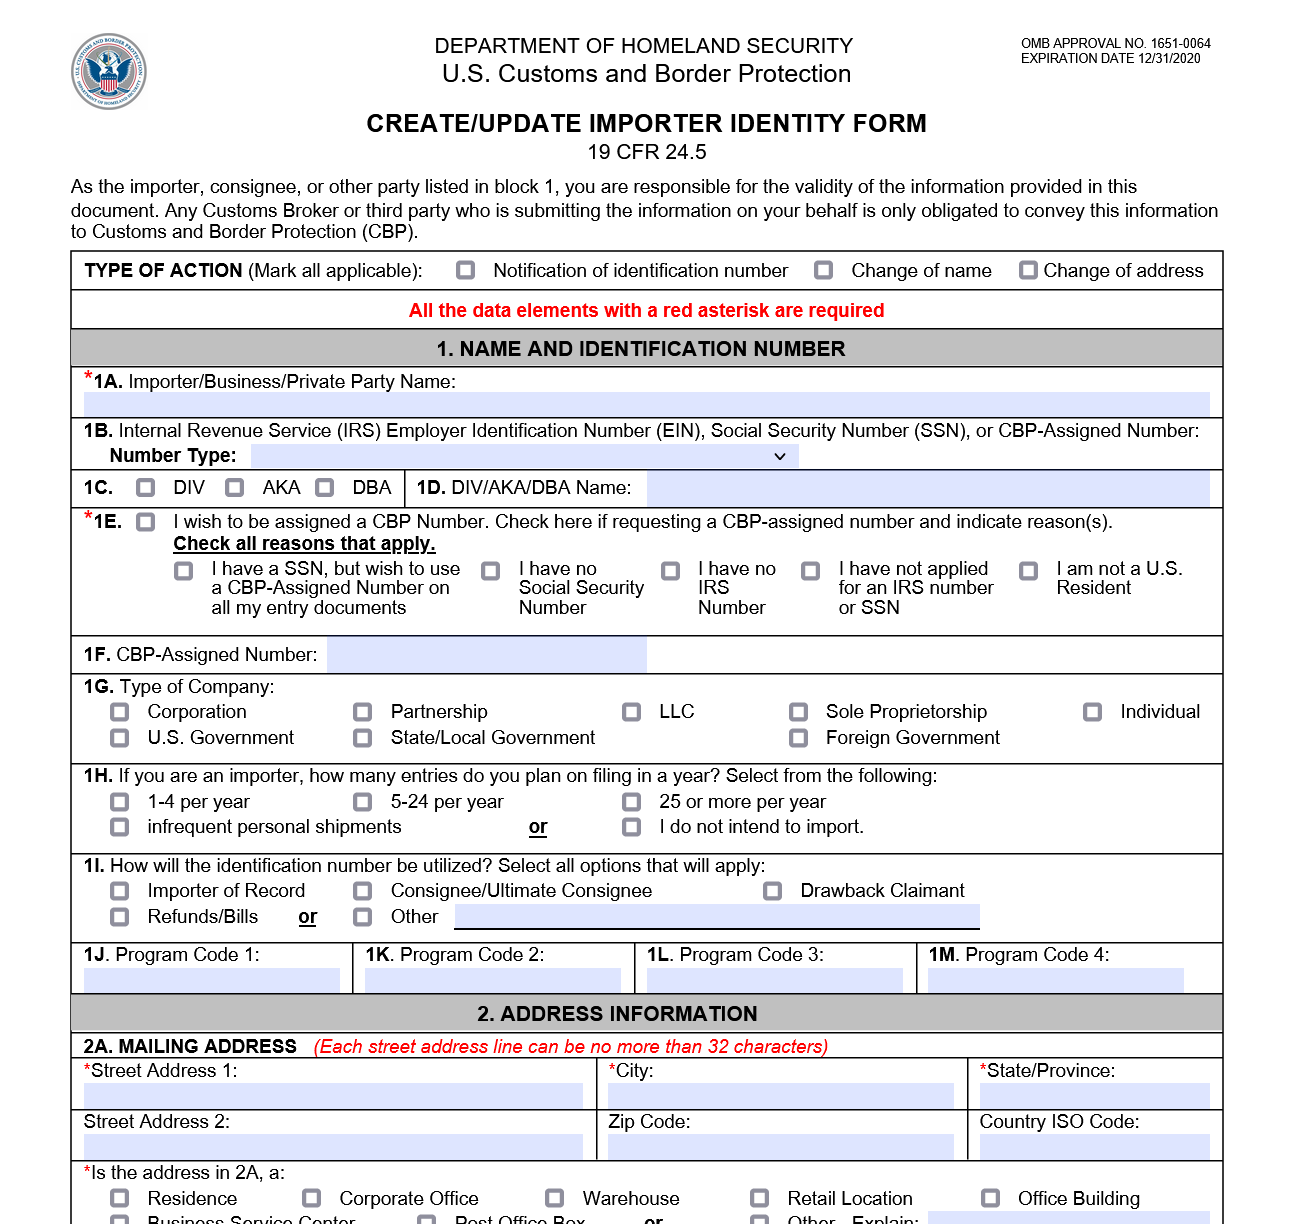 cbp-form-5106-importer-id-input-record-forms-docs-2023